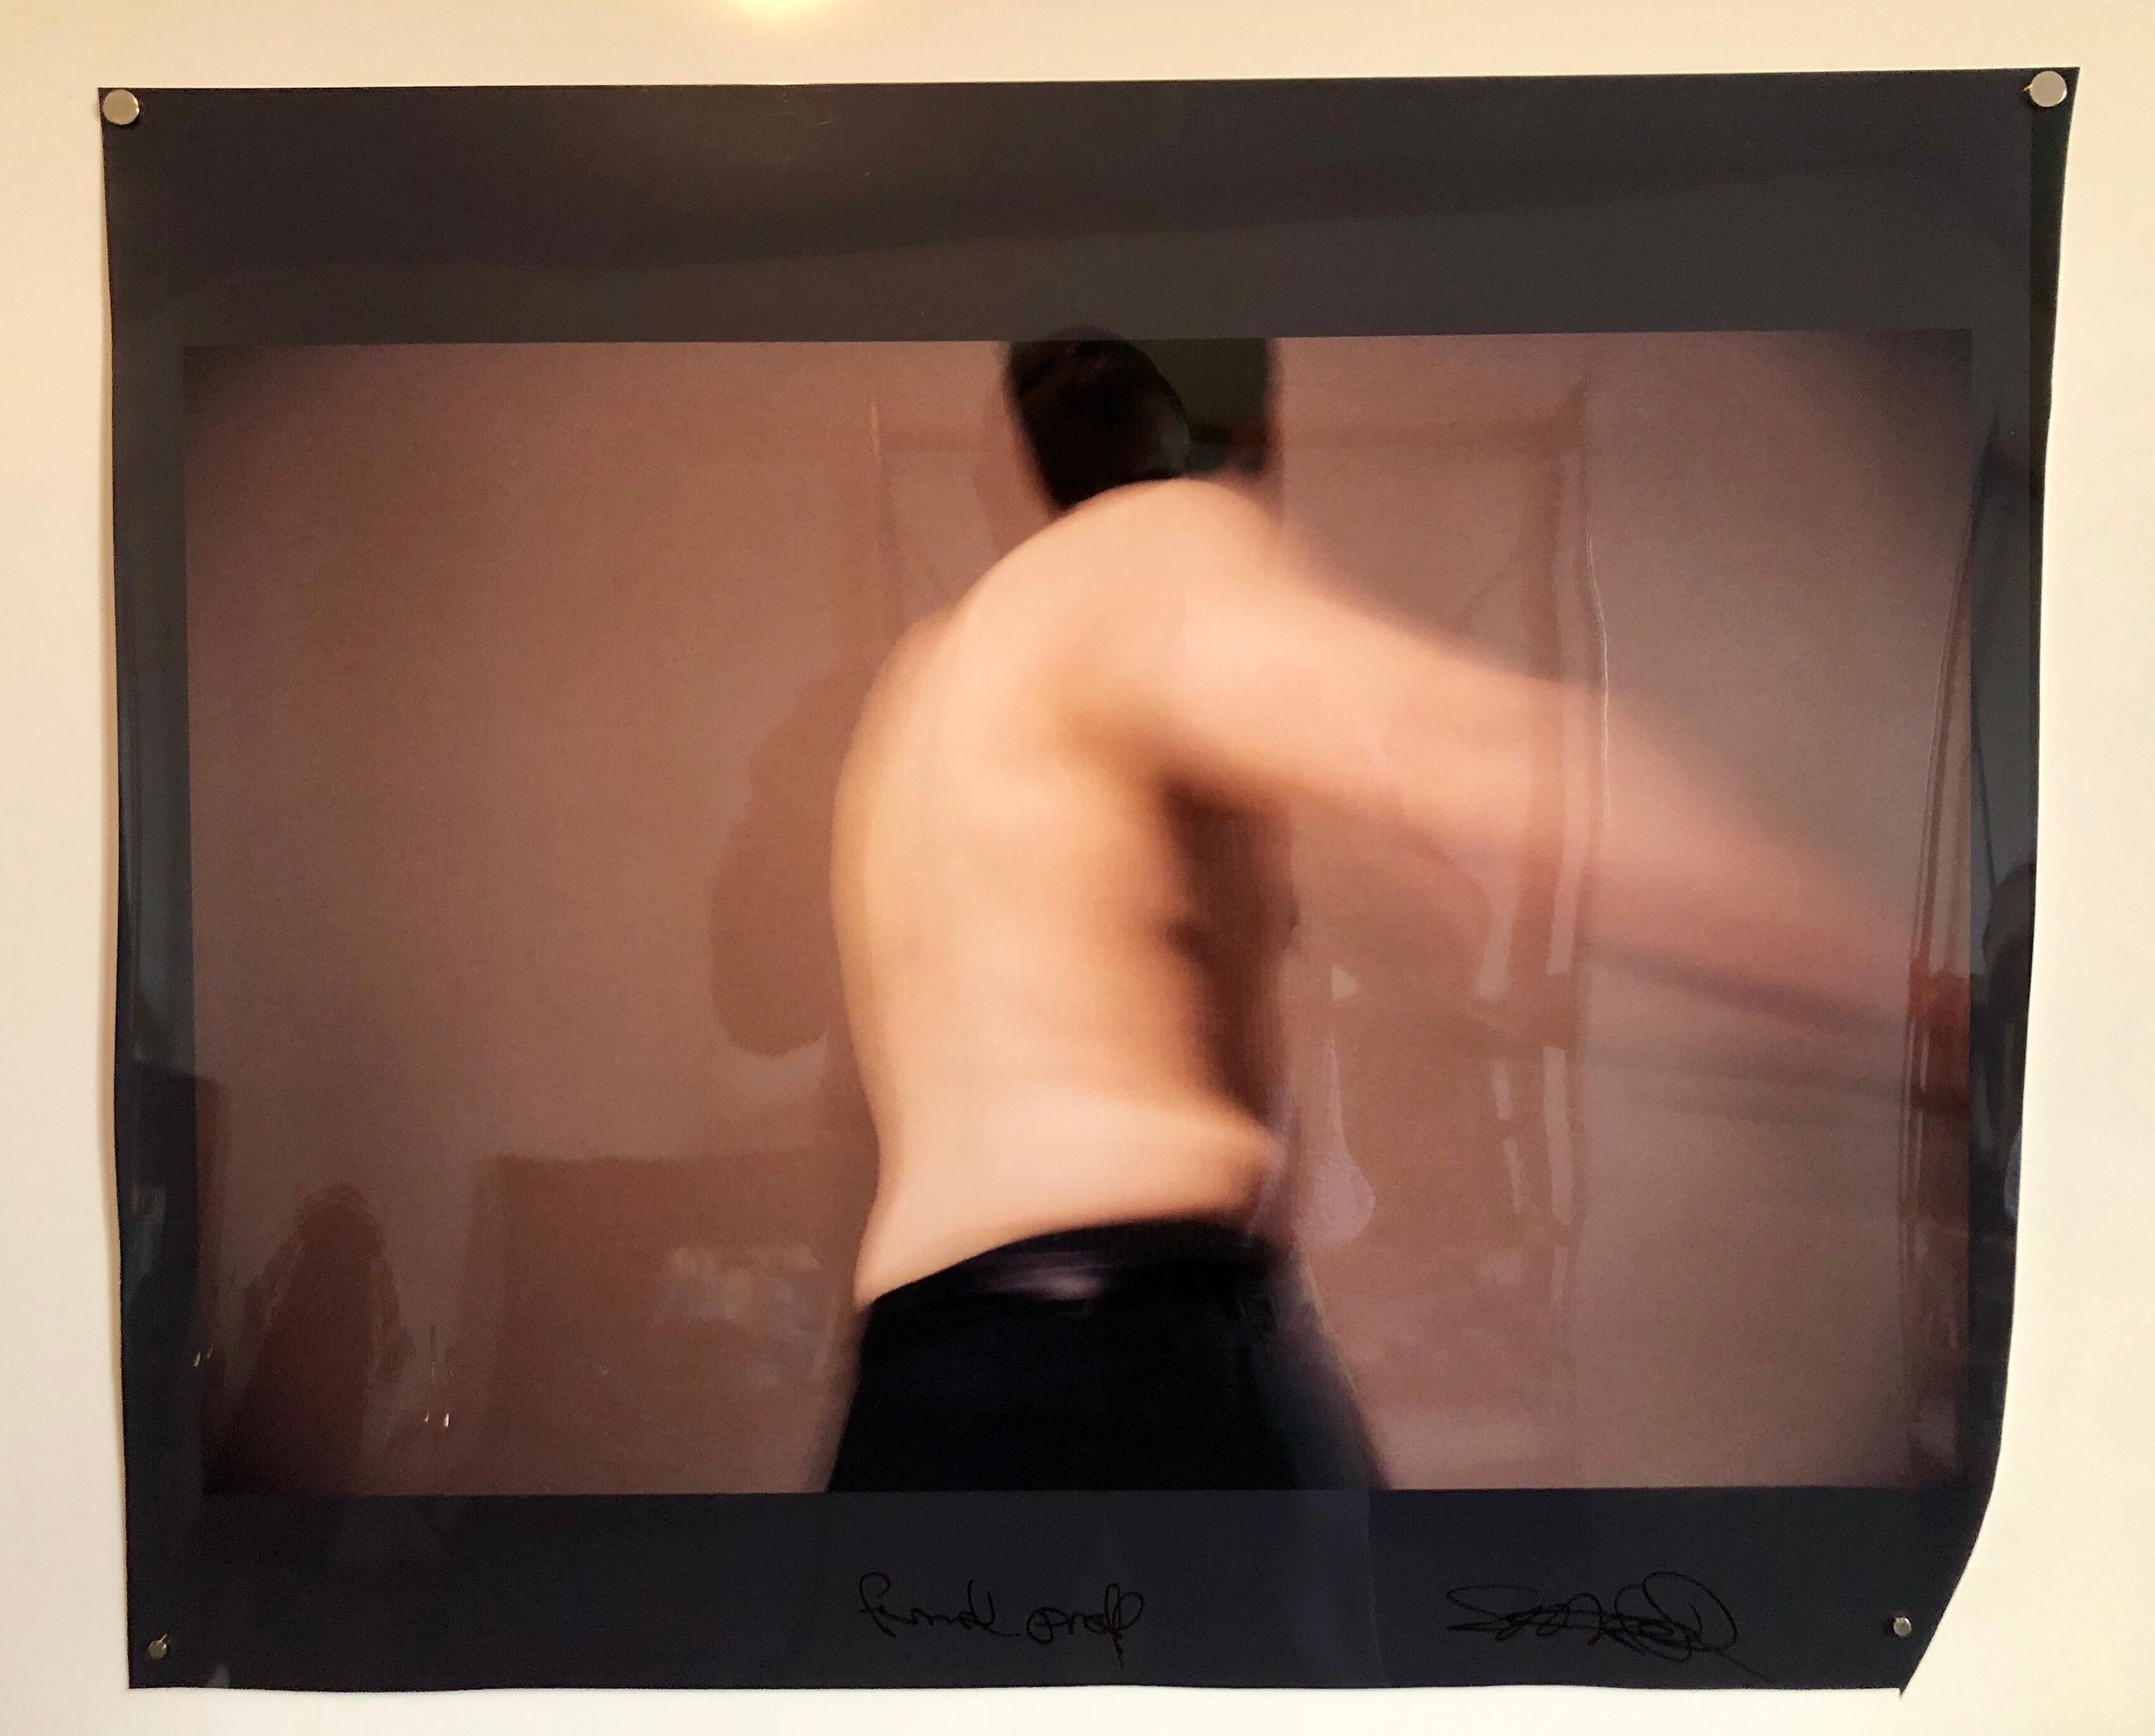 C-print on pearlescent photographic paper. Signed and inscribed Final Proof. Unevenly cut borders. dancing shirtless sideways with arm out.

Skip Arnold was born in Binghamton, New York and currently lives and works in Marseille, France. 
Skip